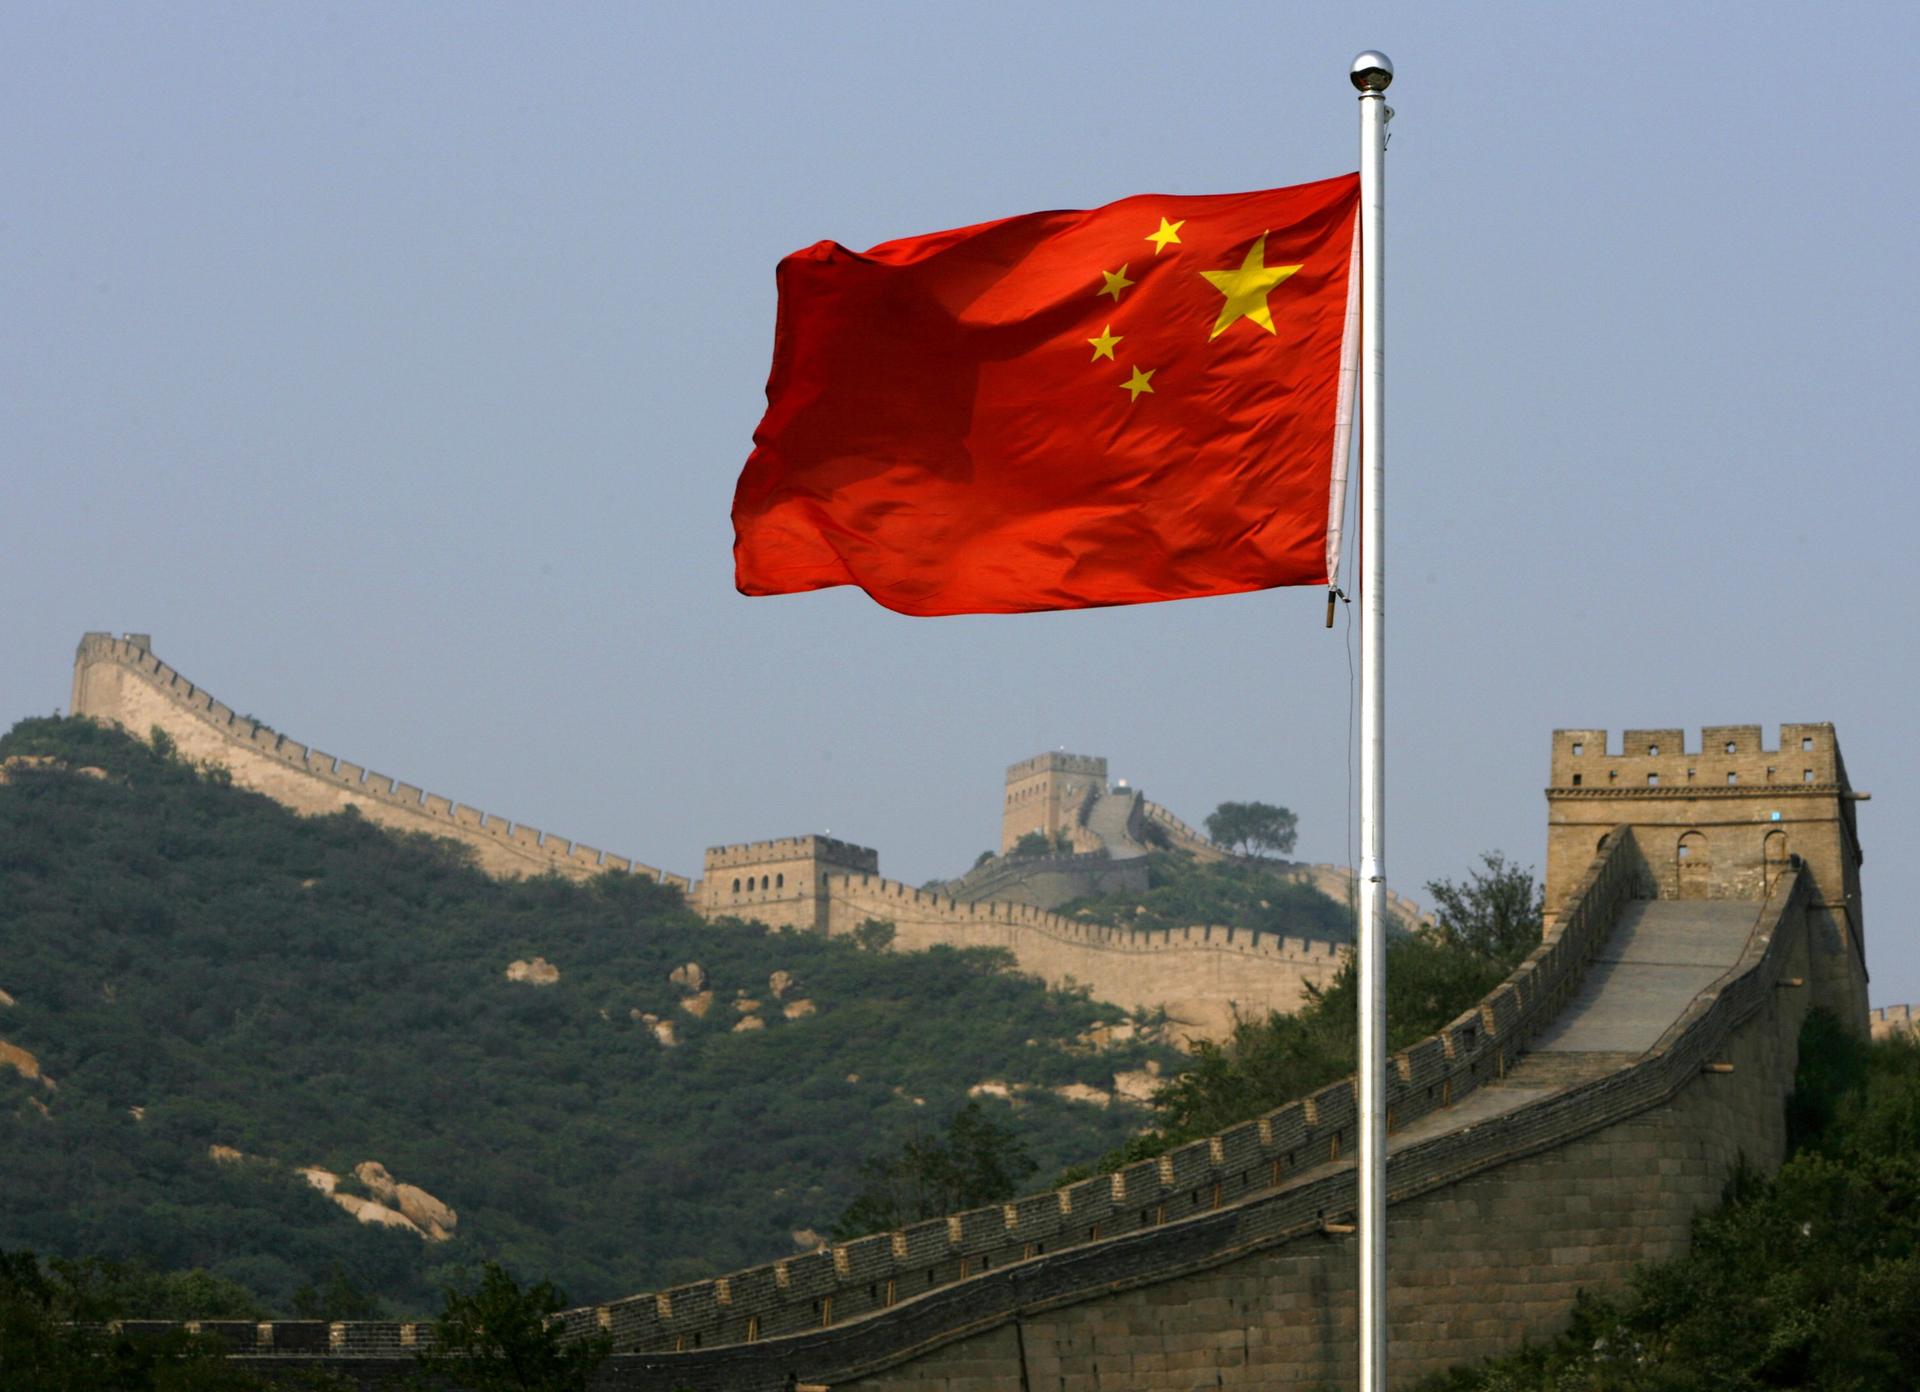 A Chinese flag flies in front of the Great Wall of China